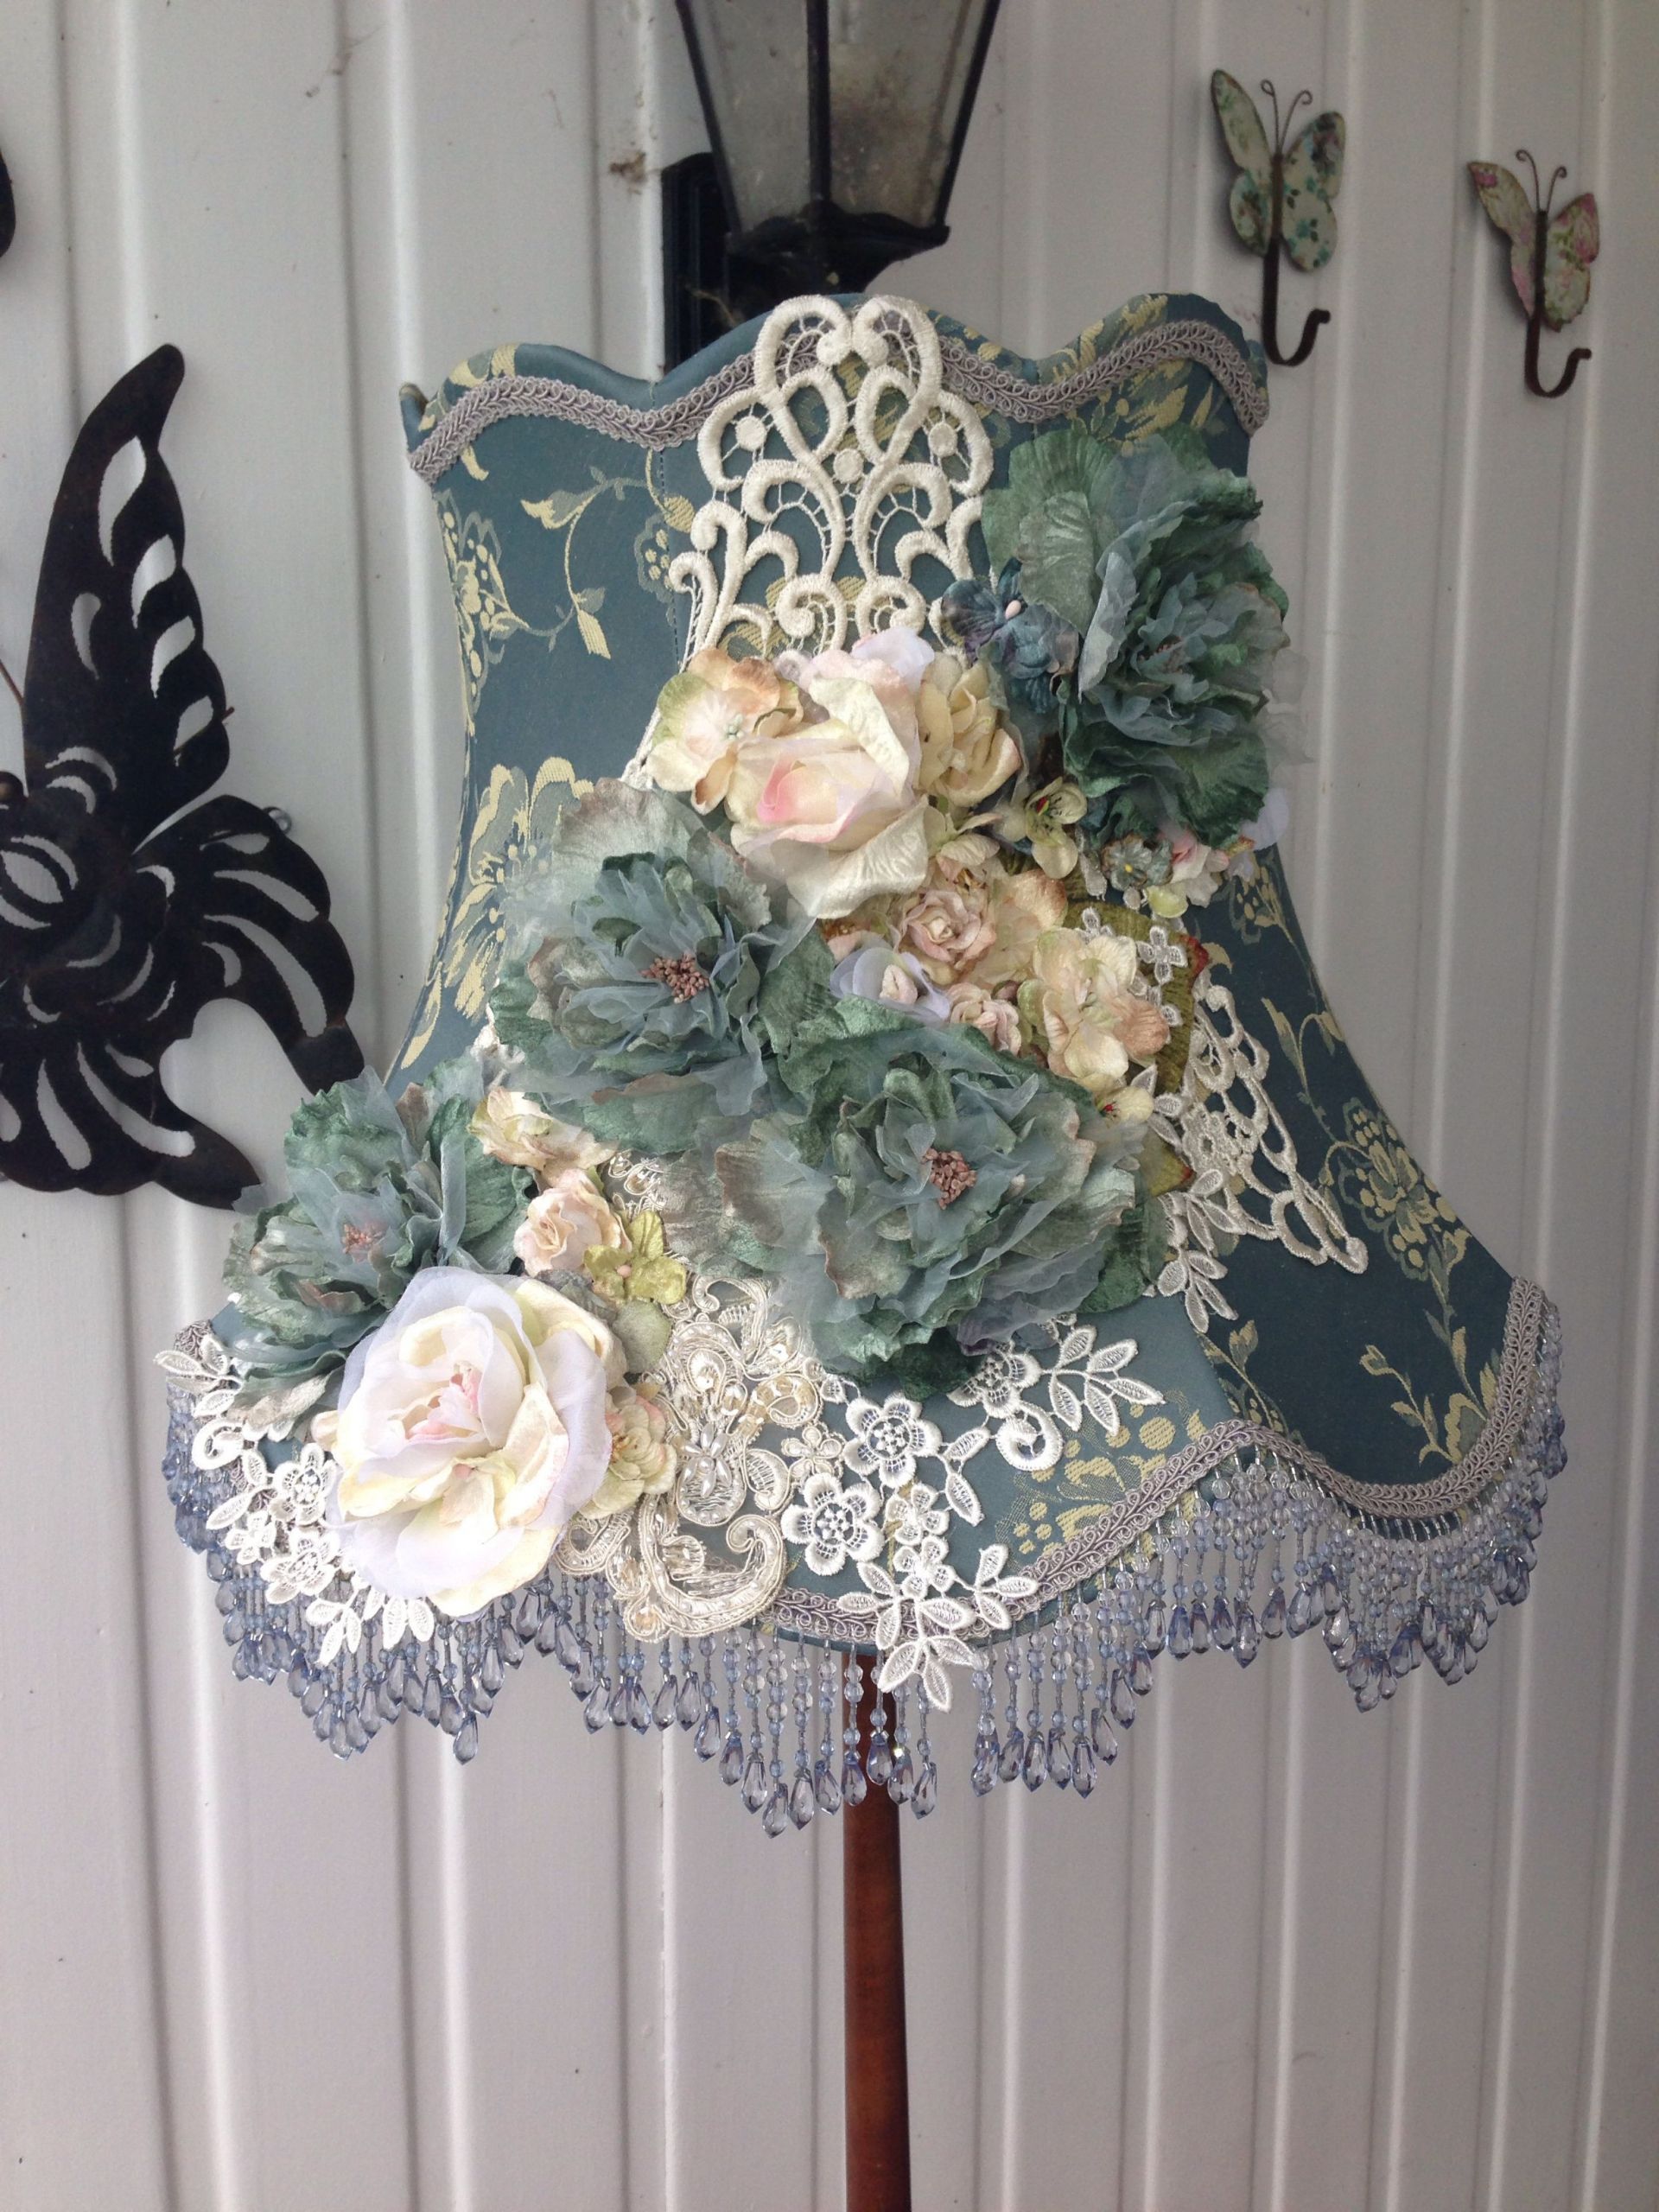 Shabby Chic Bedroom Lamp
 Custom made lampshade for an old style home in 2019